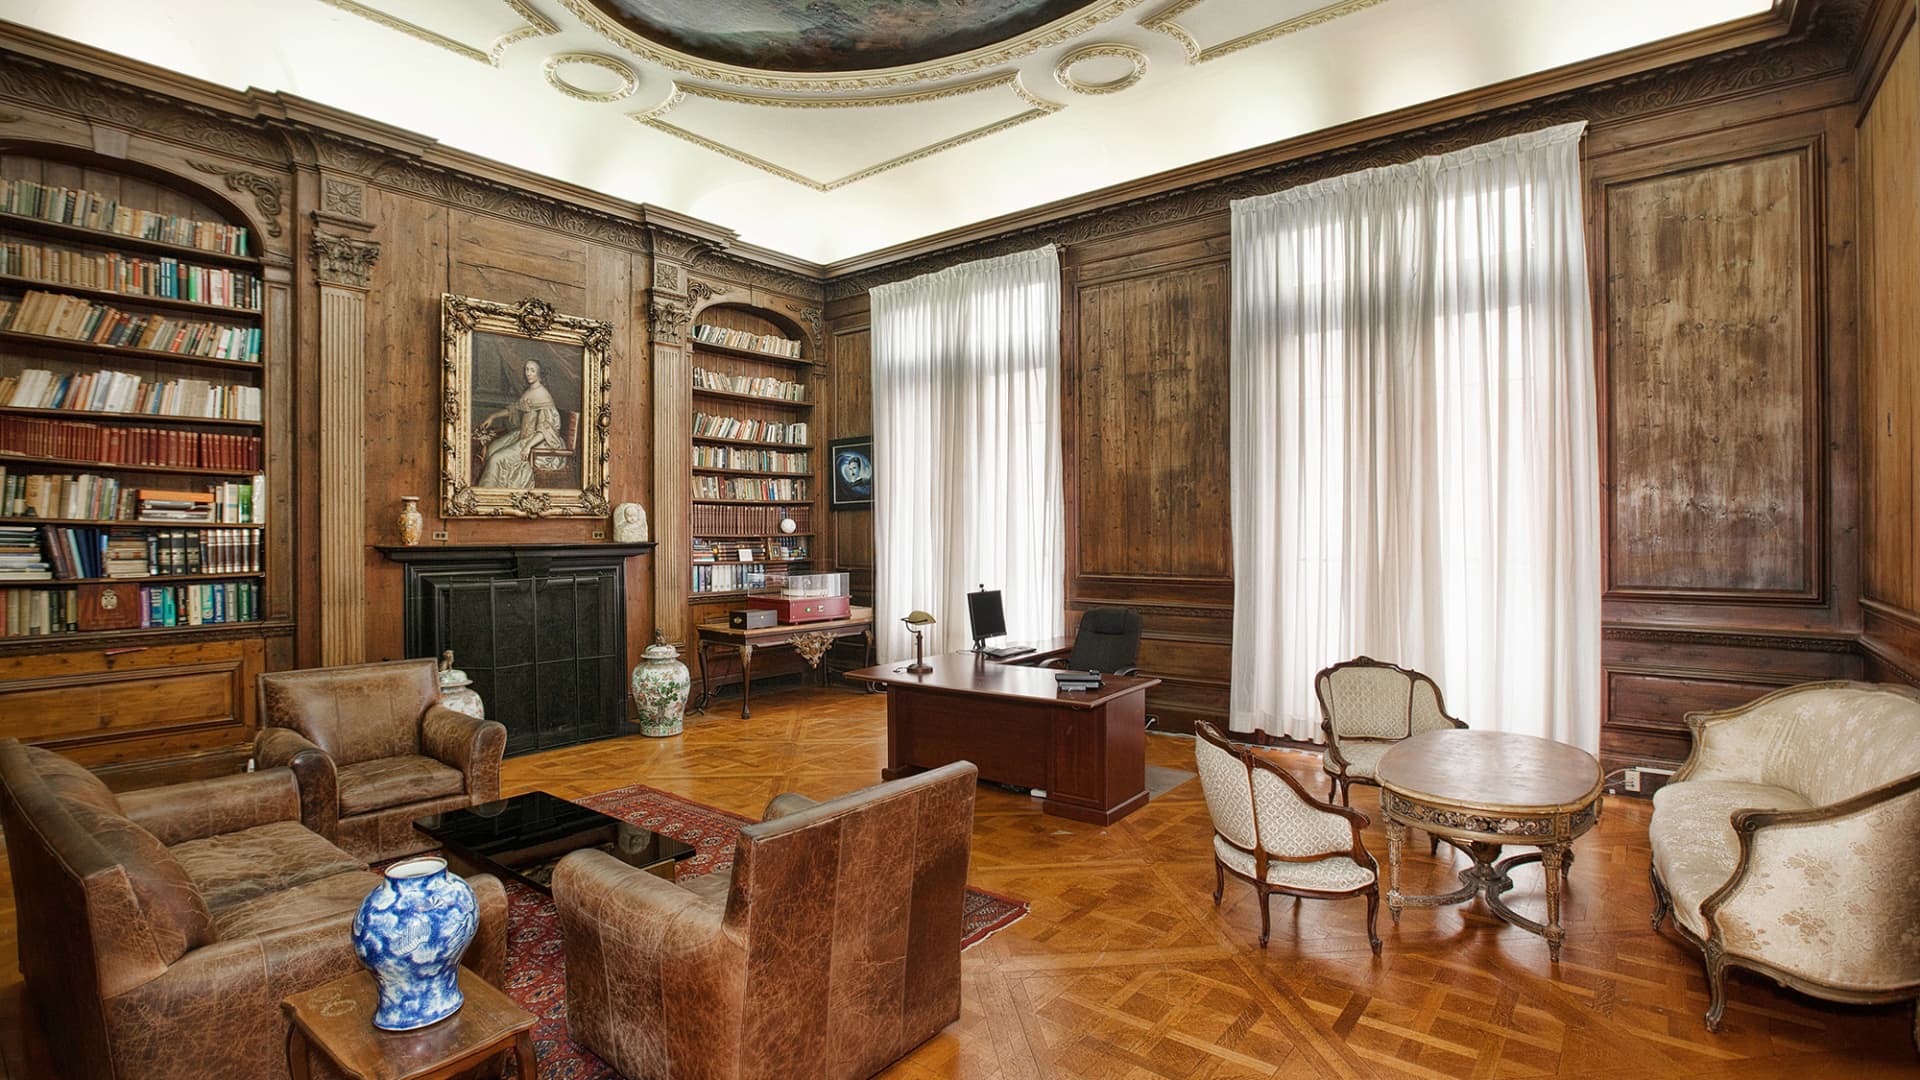 This grand salon now serves as an ambassador’s office with bulletproof windows.